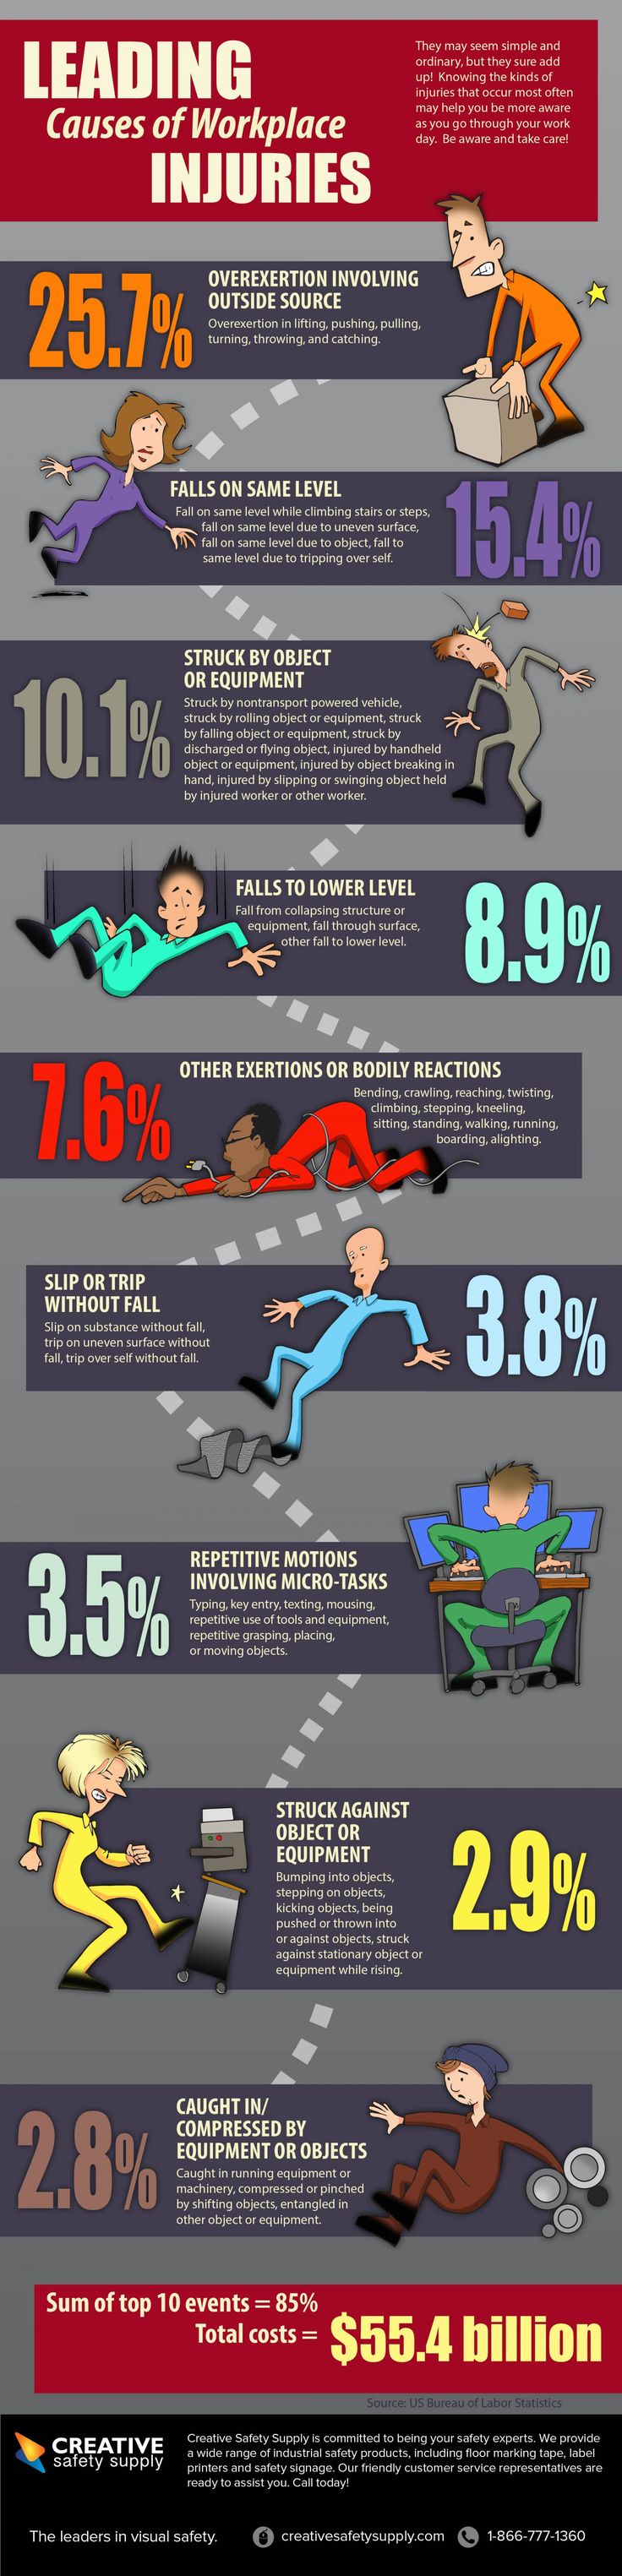 Leading Causes of Workplace Injuries -shared by cssjen on Mar 22, 2014